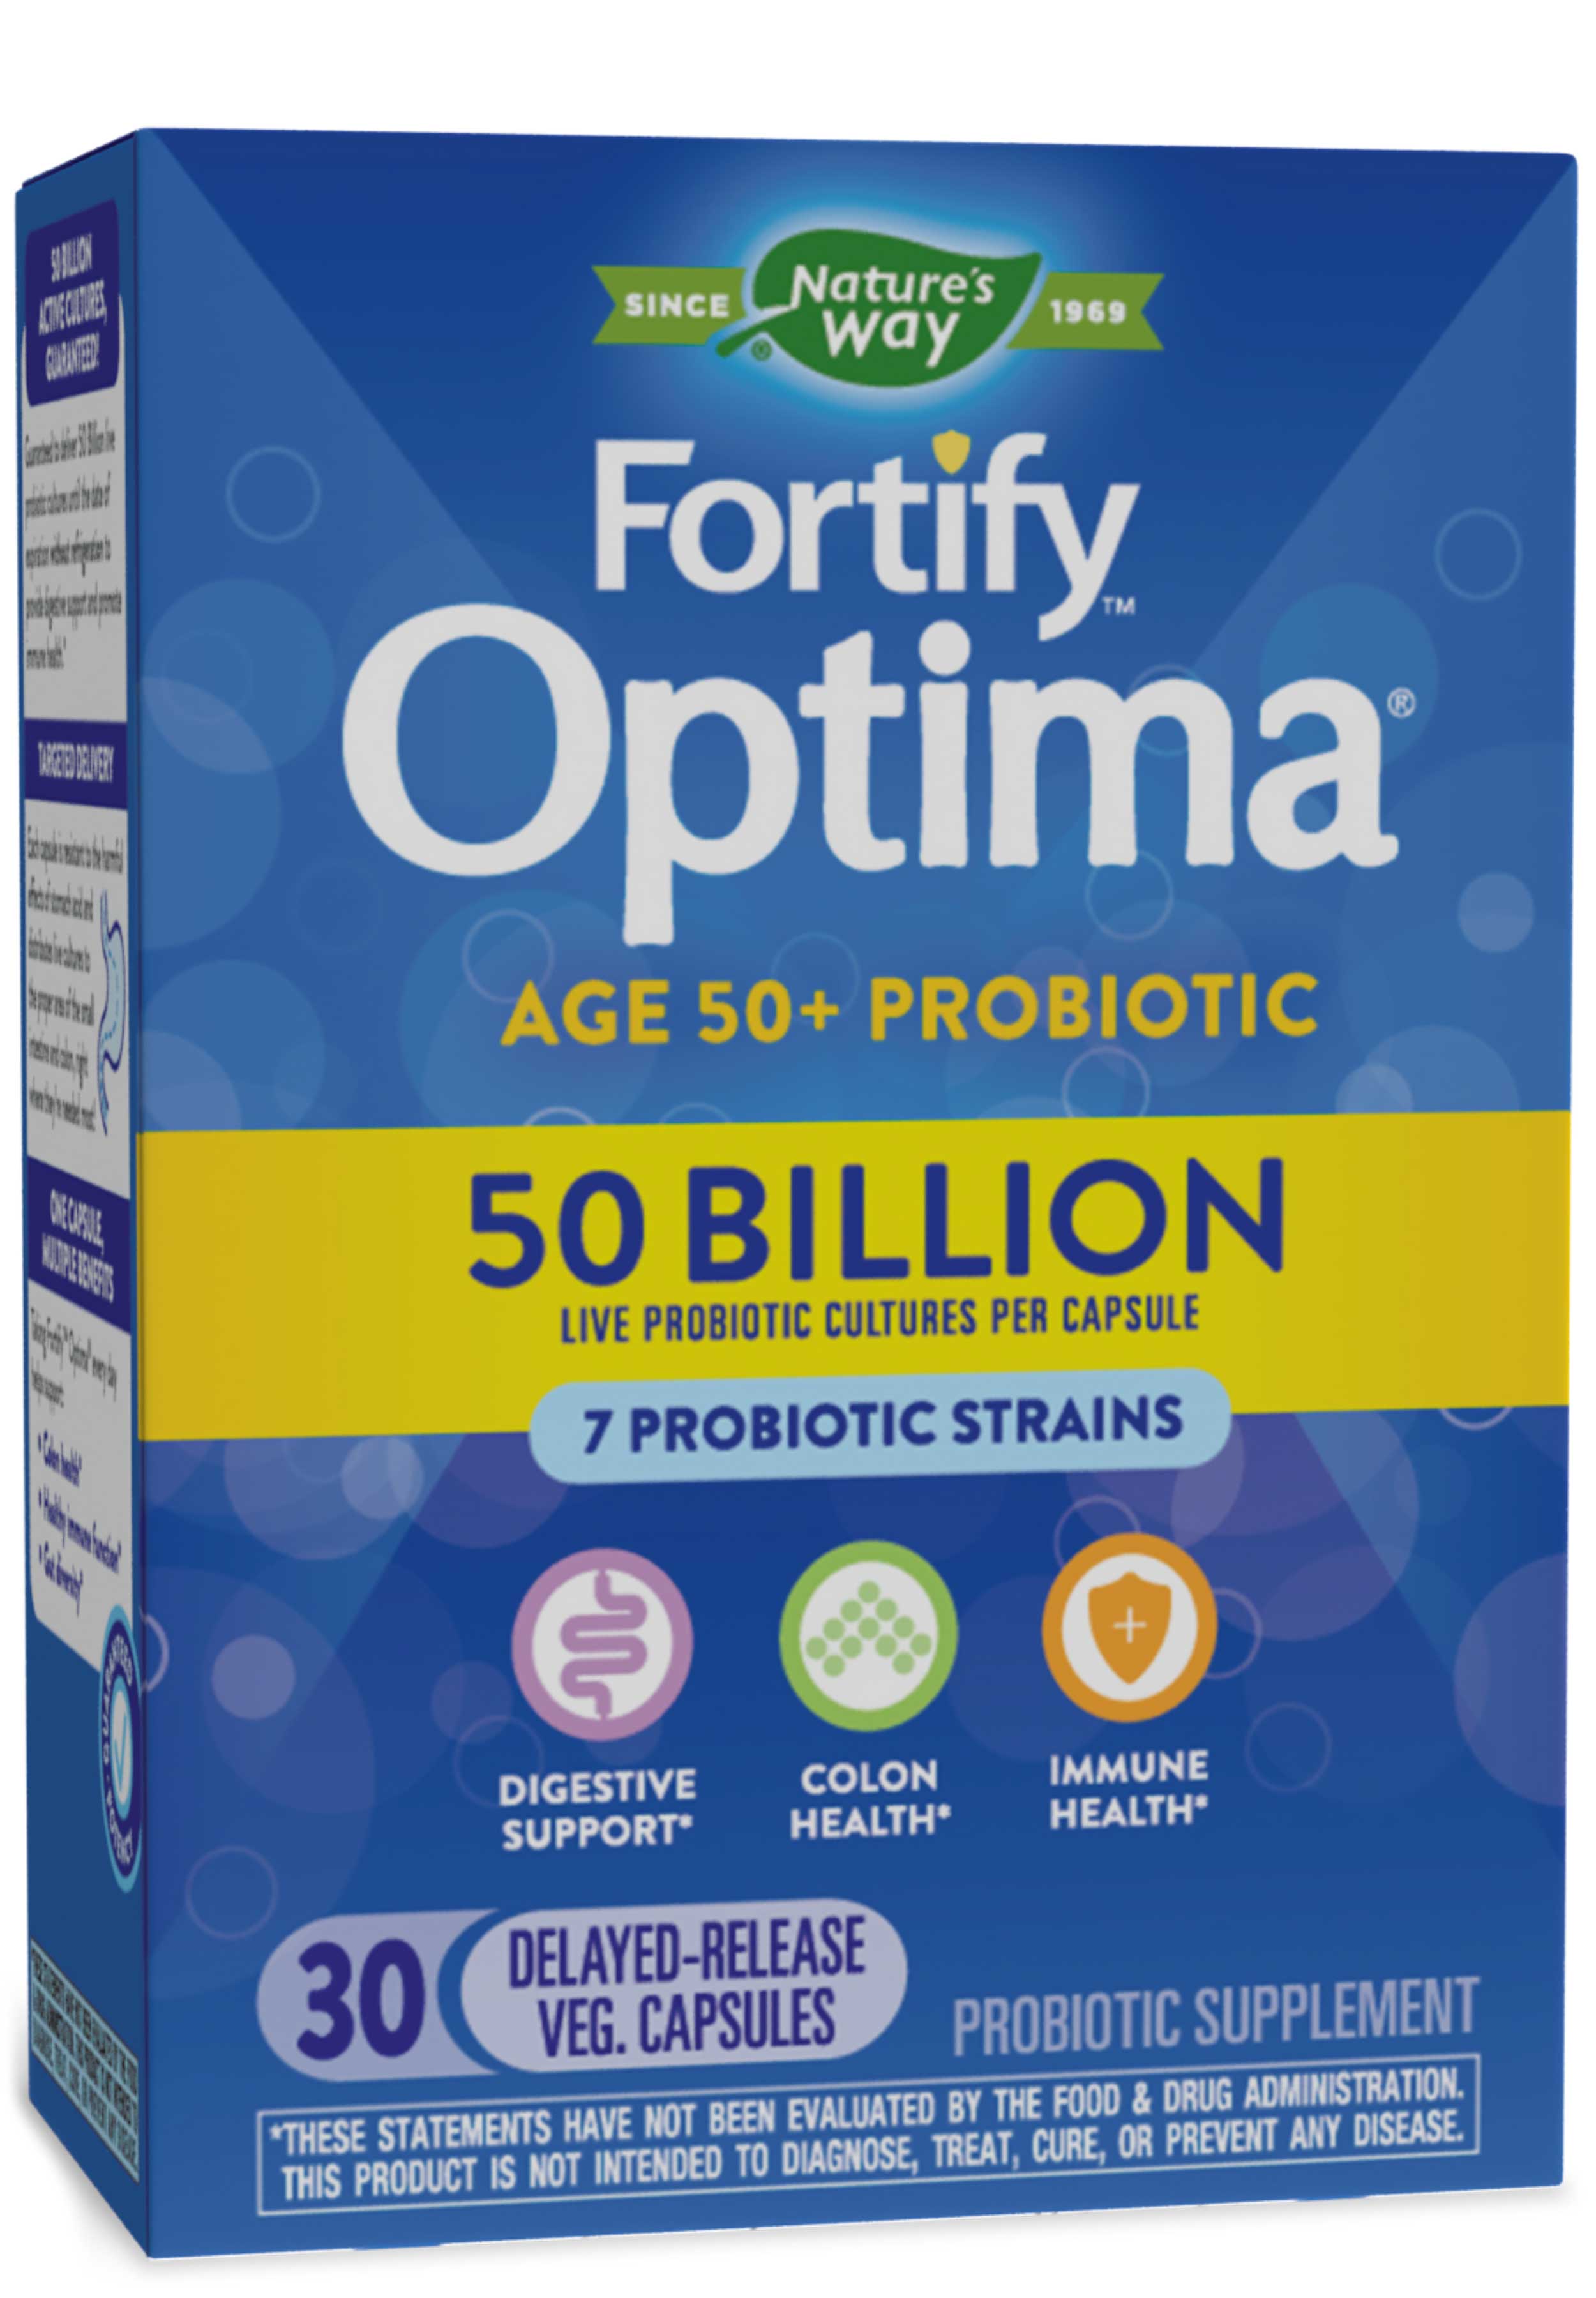 Nature's Way Fortify Optima Adult 50+ 50 Billion Probiotic